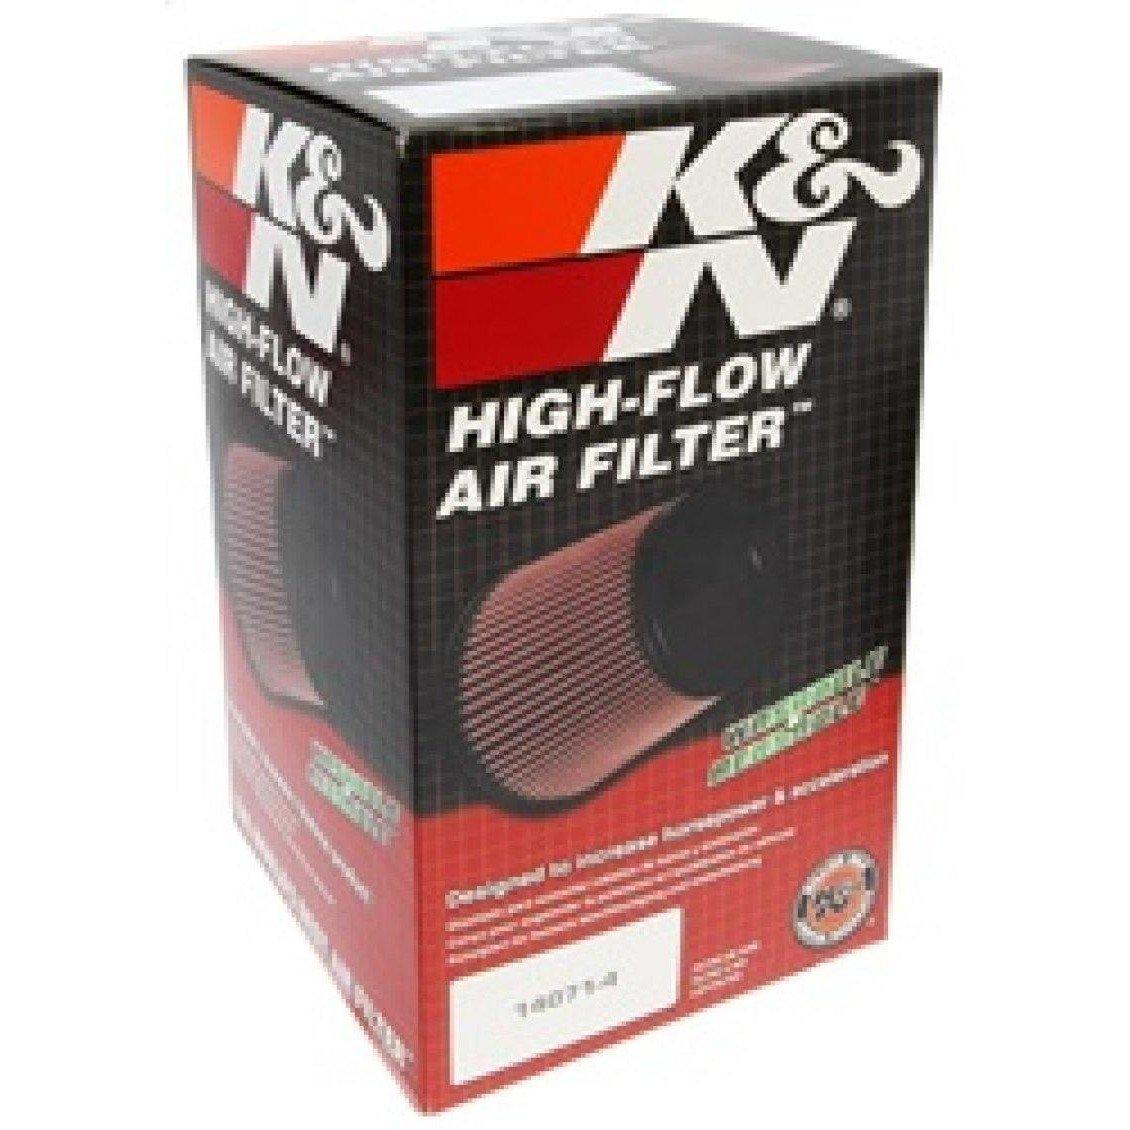 K&N Universal Round Tapered Filter 3 inch FLG / 5 inch Bottom / 4 inch Top / 7 7/8 inch Height - SMINKpower.eu